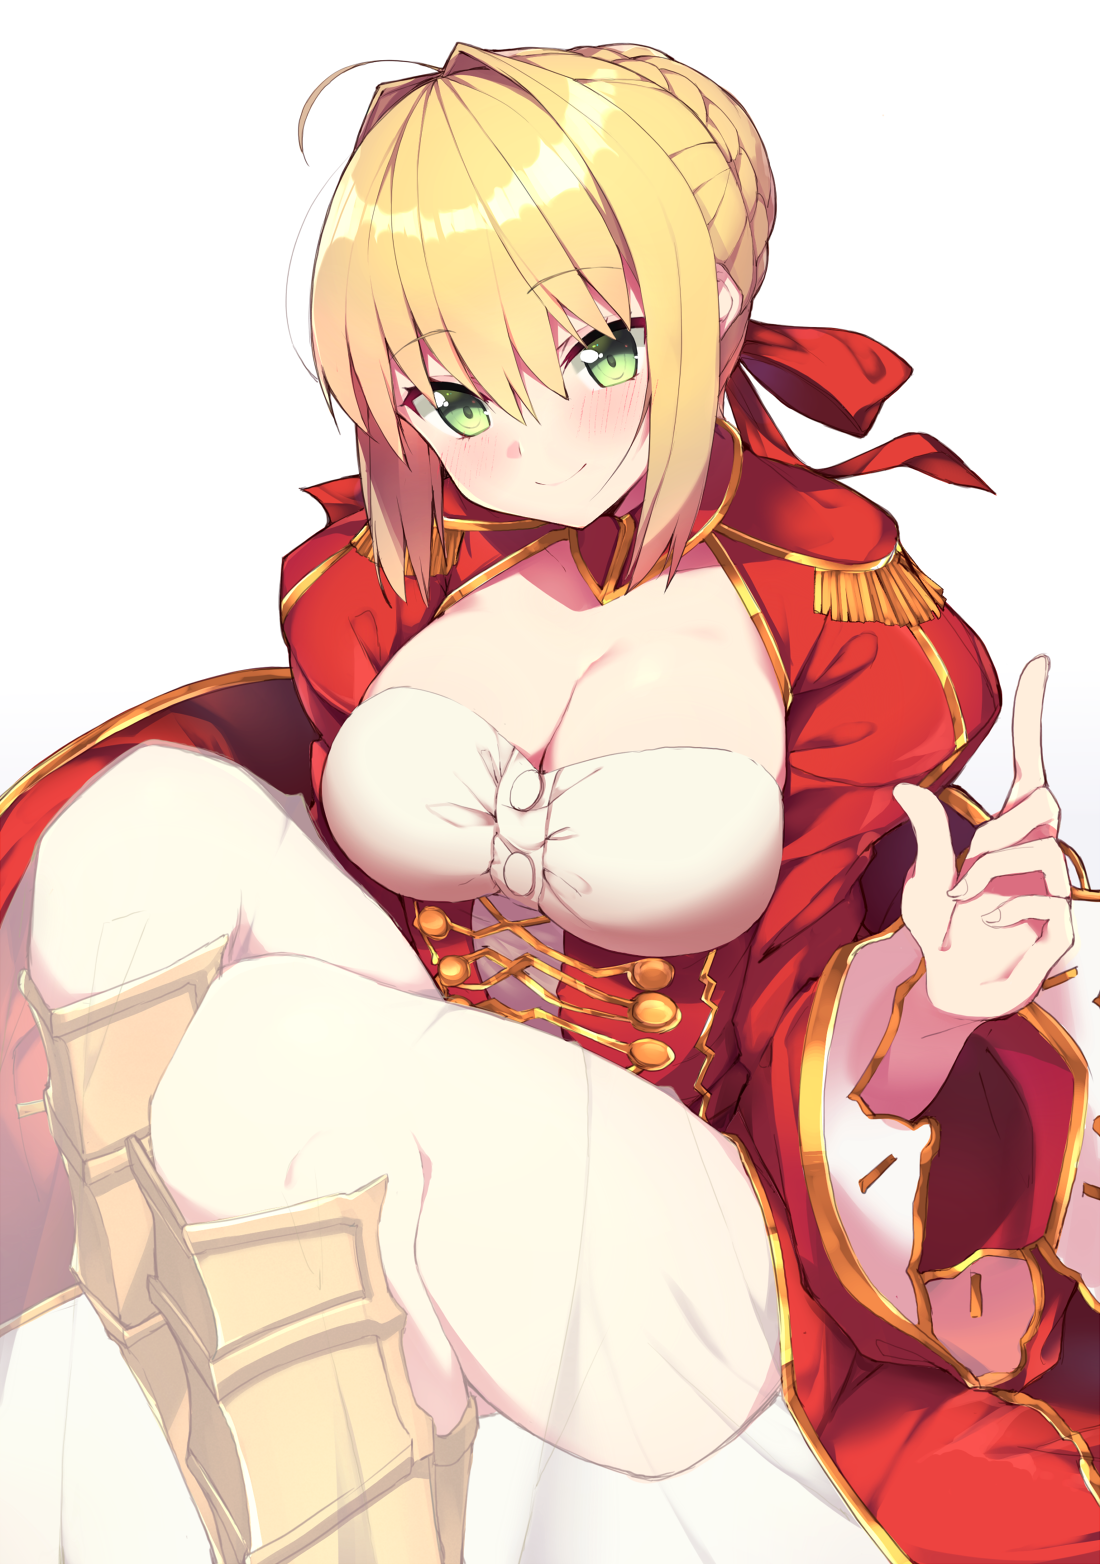 Anime 1100x1564 anime anime girls digital art artwork 2D portrait display Fate series Fate/Extra Nero Claudius Haruyuki blonde green eyes smiling blushing cleavage Fate/Extra CCC Fate/Grand Order